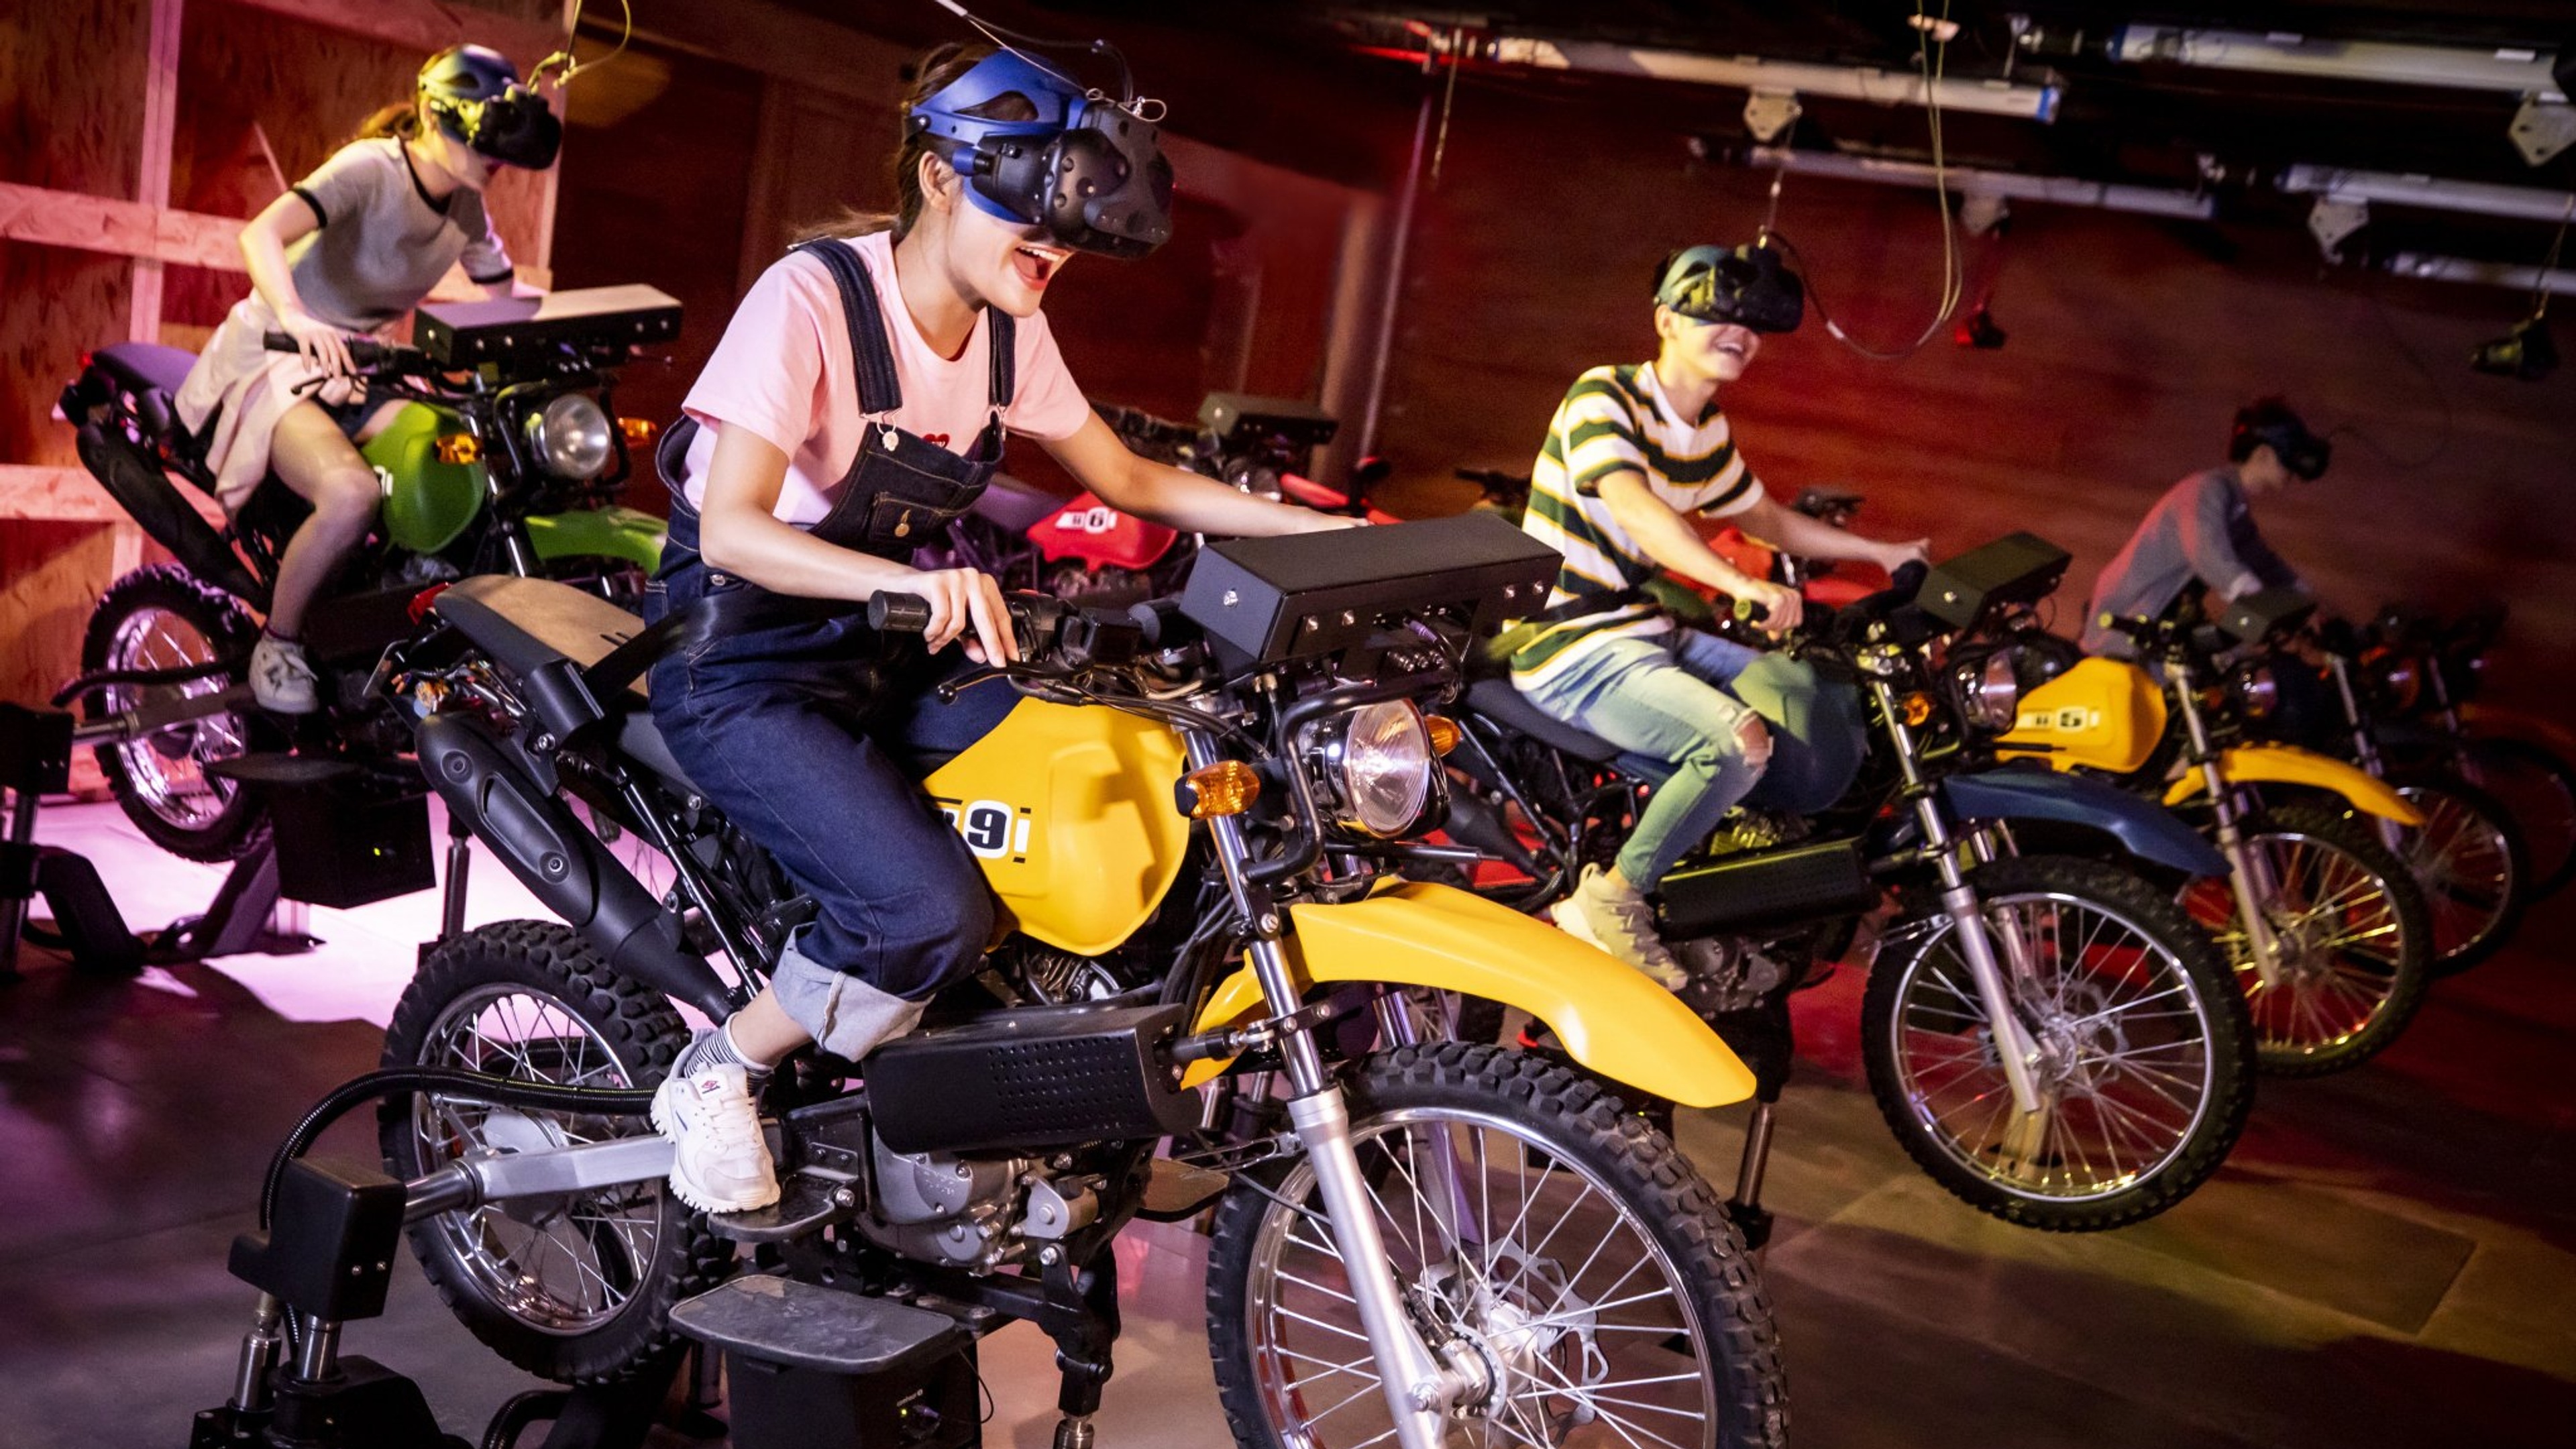 Children riding motorcycles in an immersive VR environment wearing headsets